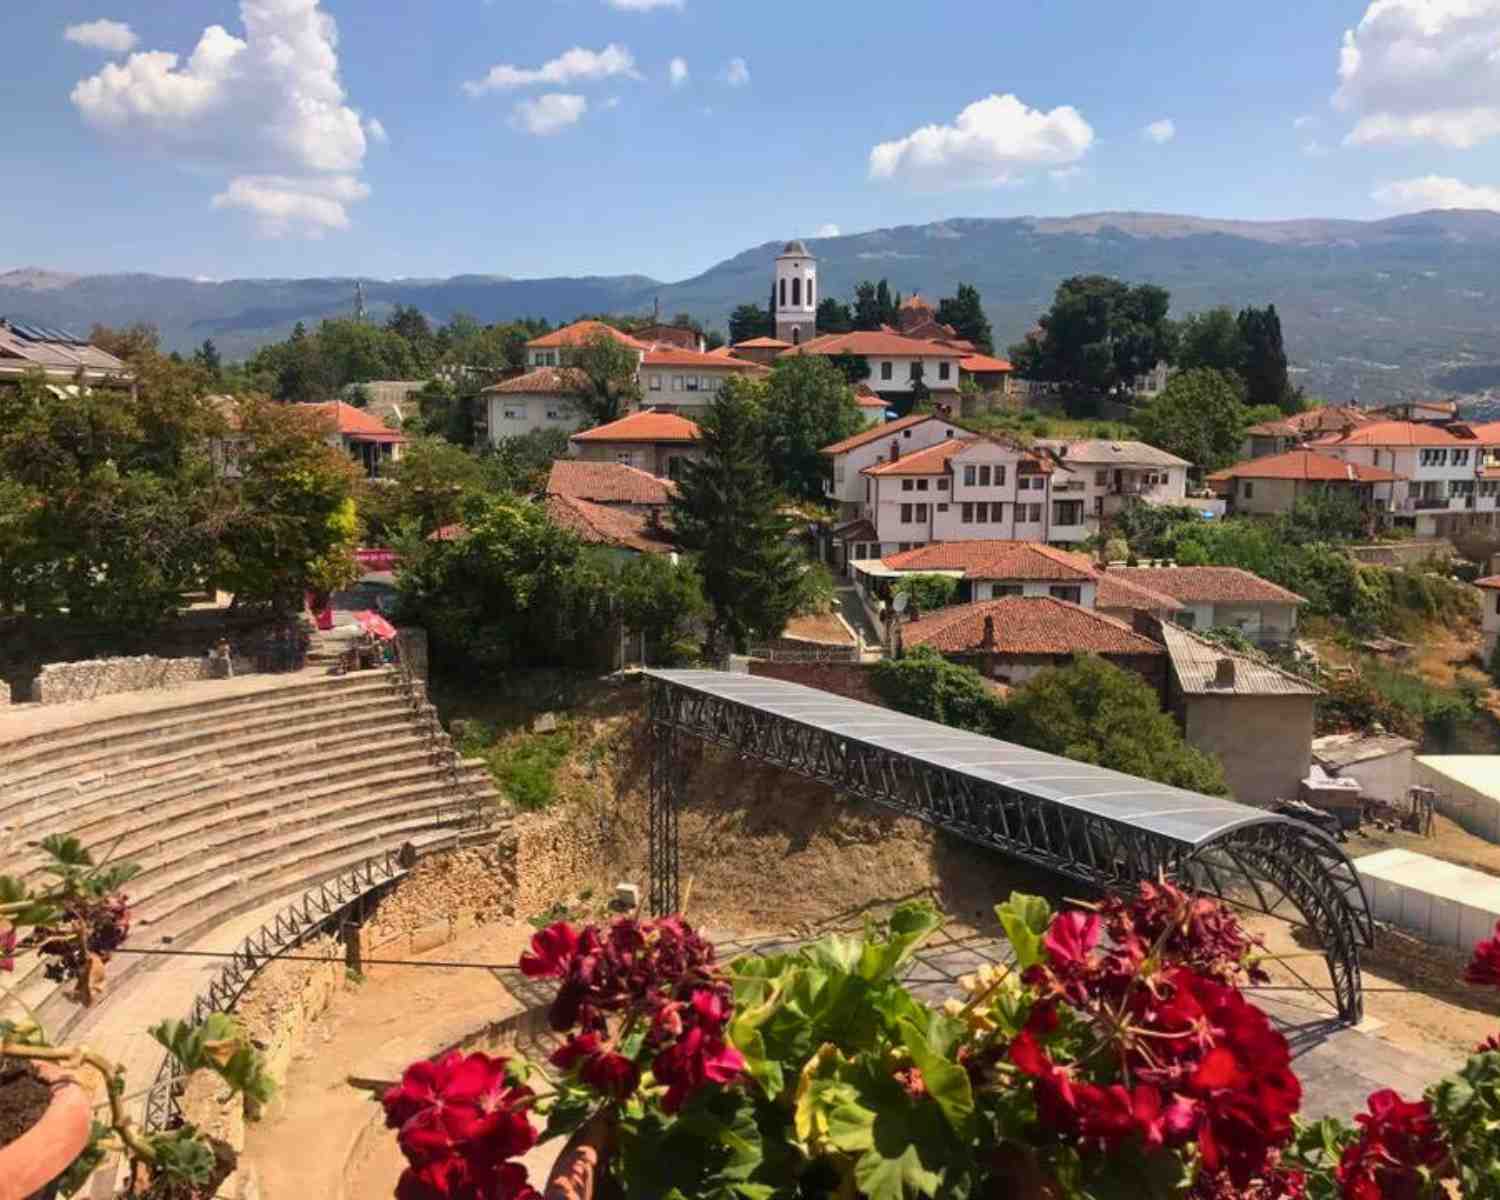 The Ancient Theatre of Ohrid in Macedonia